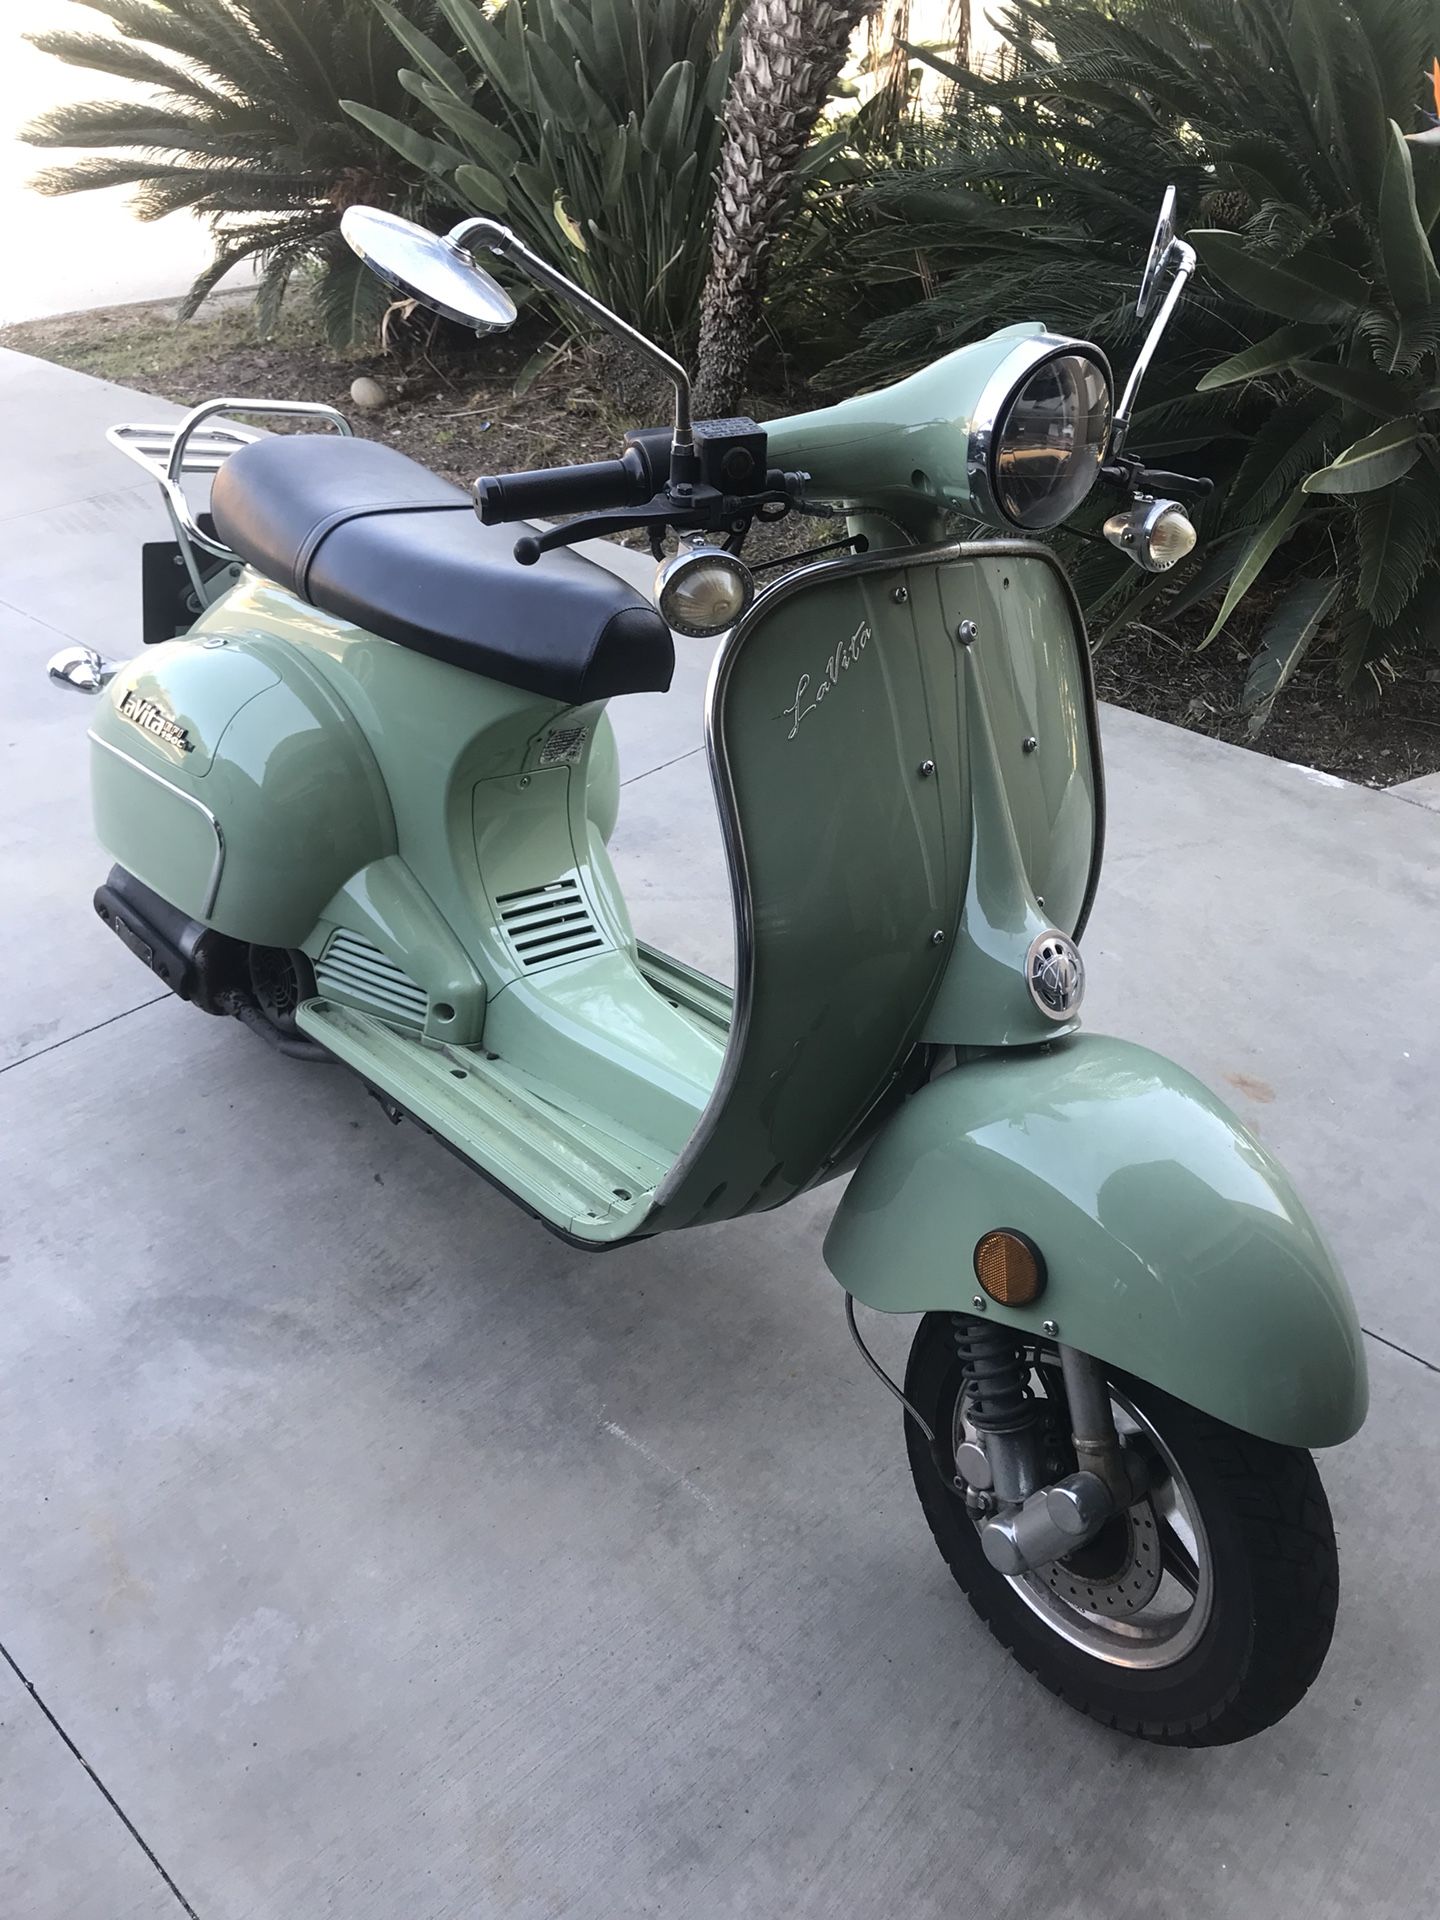 Scooter for sale-La Vita 150 EFI scooter beautiful vintage styling